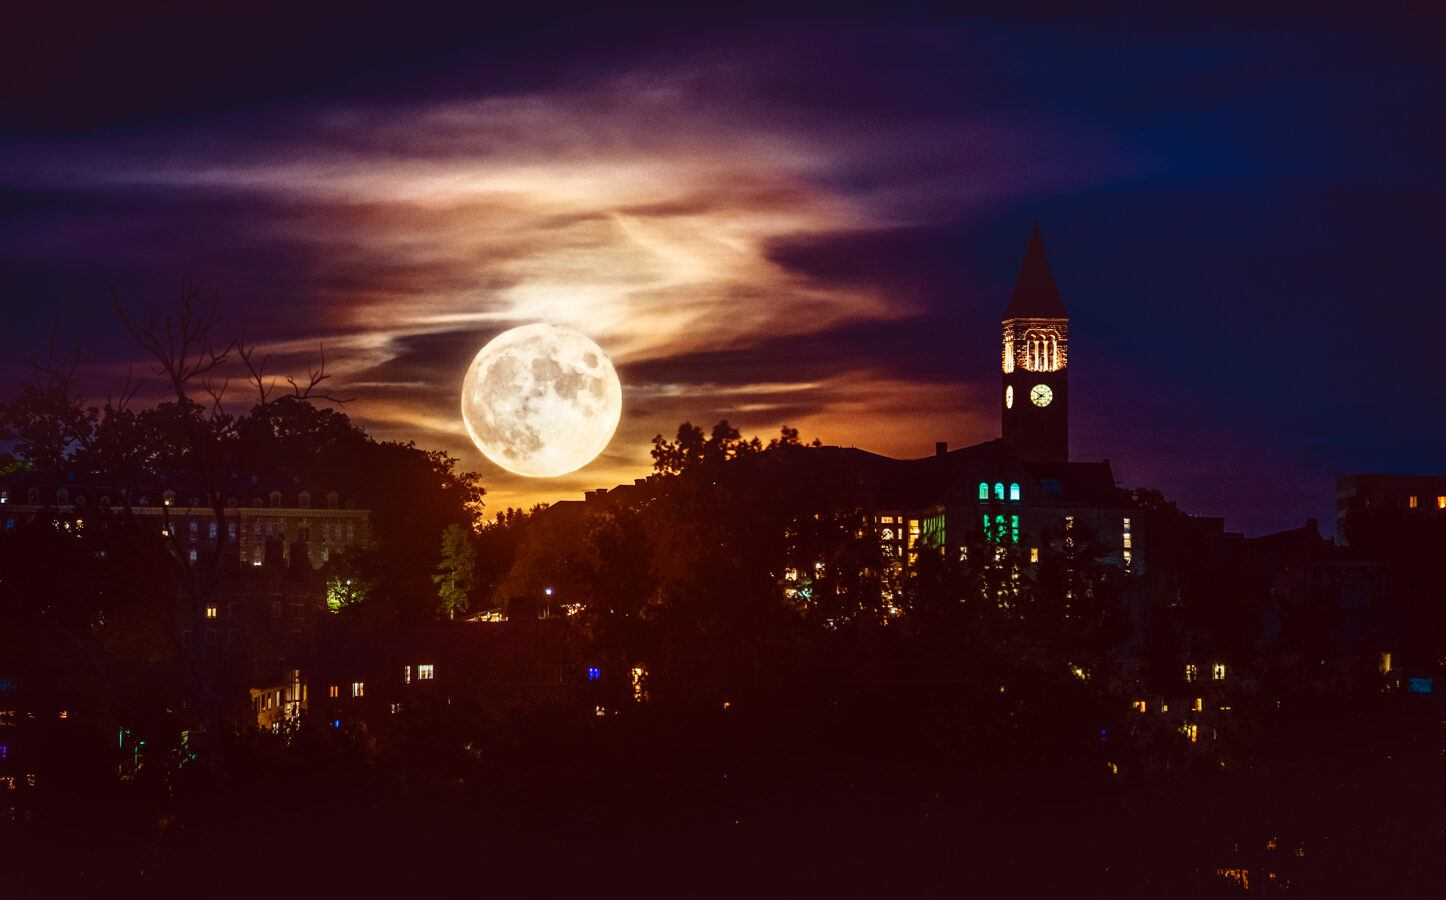 Full moon over campus